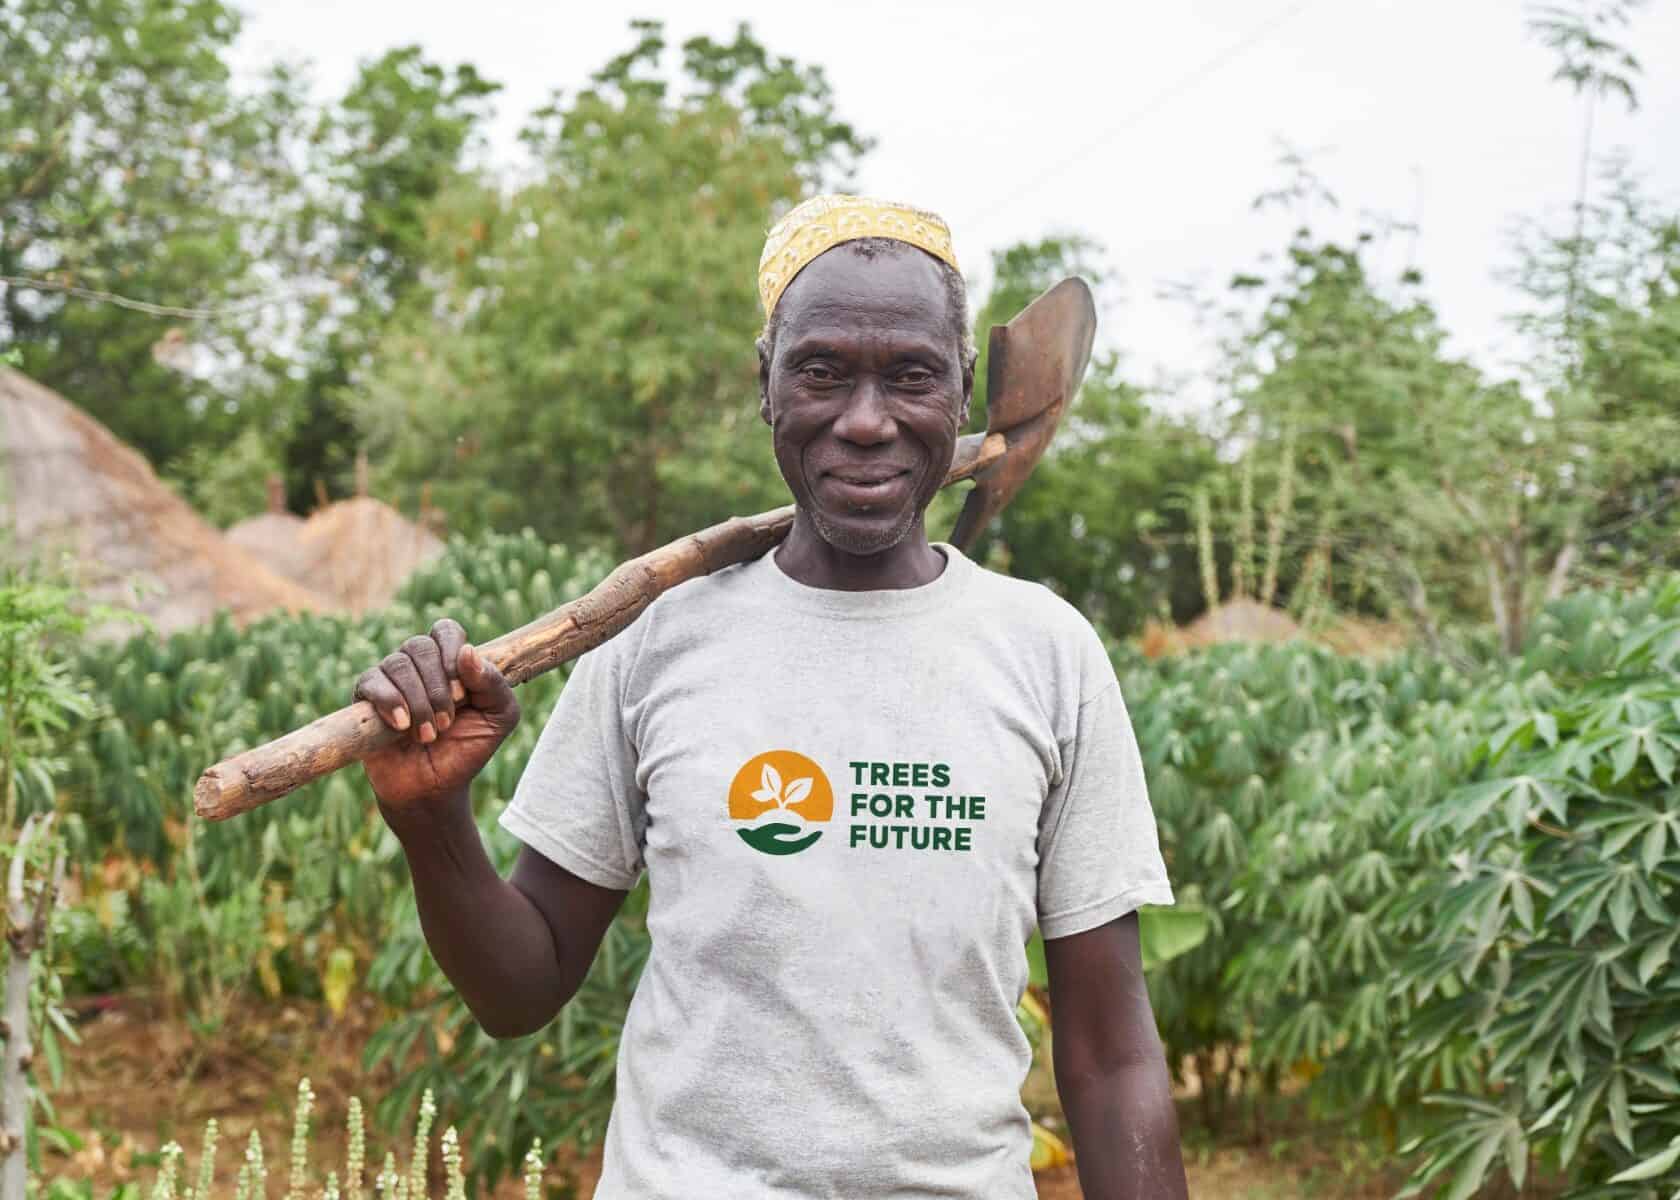 man wearing a trees for the future tshirt and holding a tool to plant trees